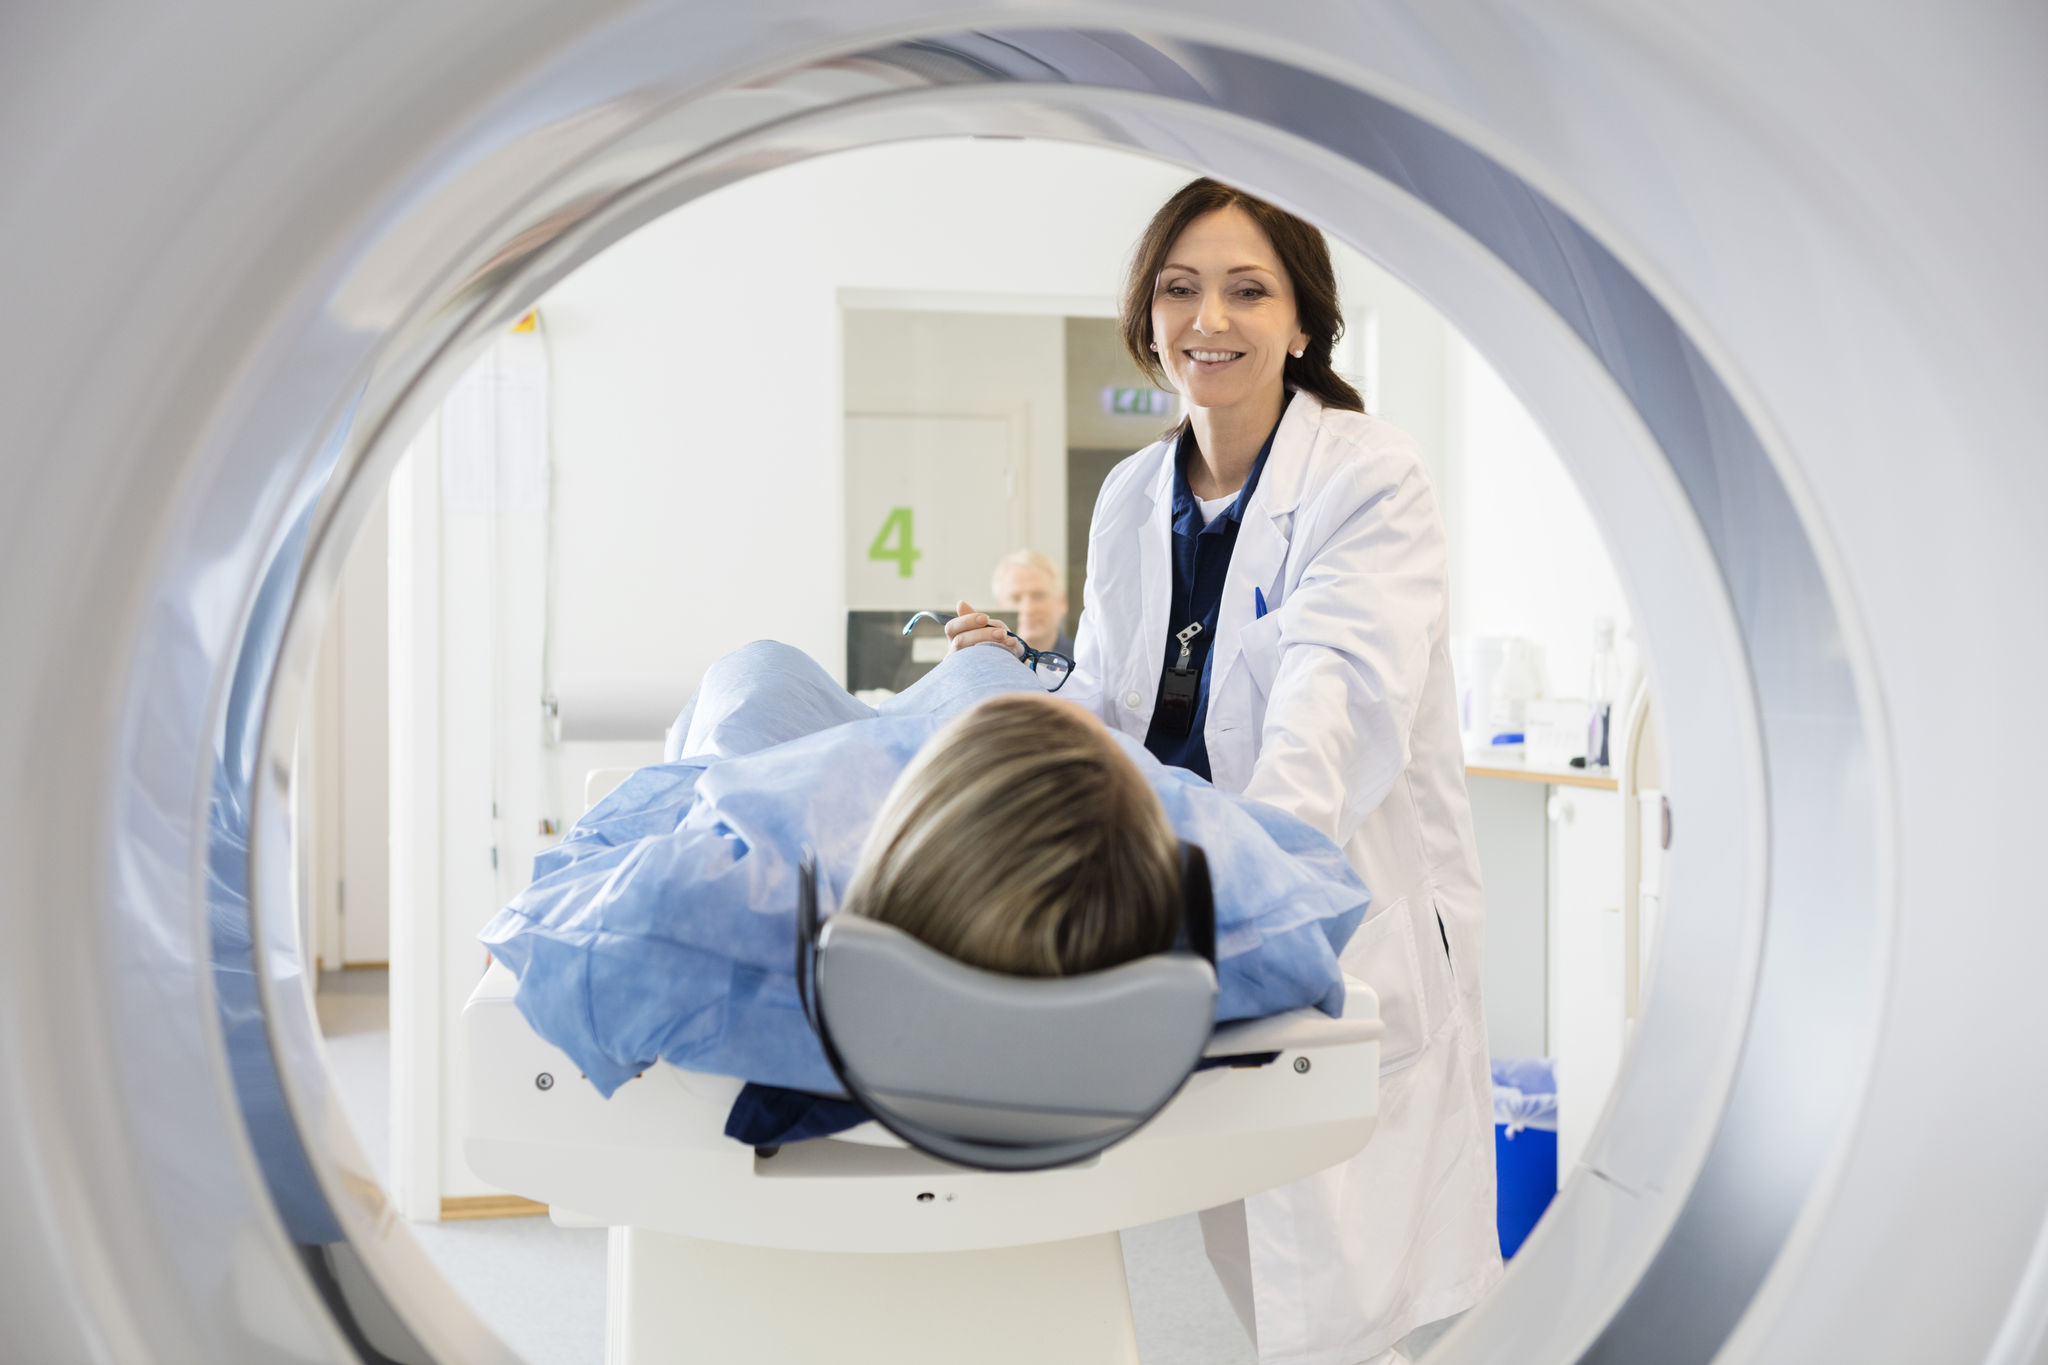 Female Doctor Looking At Patient Undergoing CT Scan; Shutterstock ID 476546674; purchase_order: Melissa McRae; job: Melissa McRae; client: Melissa McRae; other: melissa.mcrae@genesiscare.com